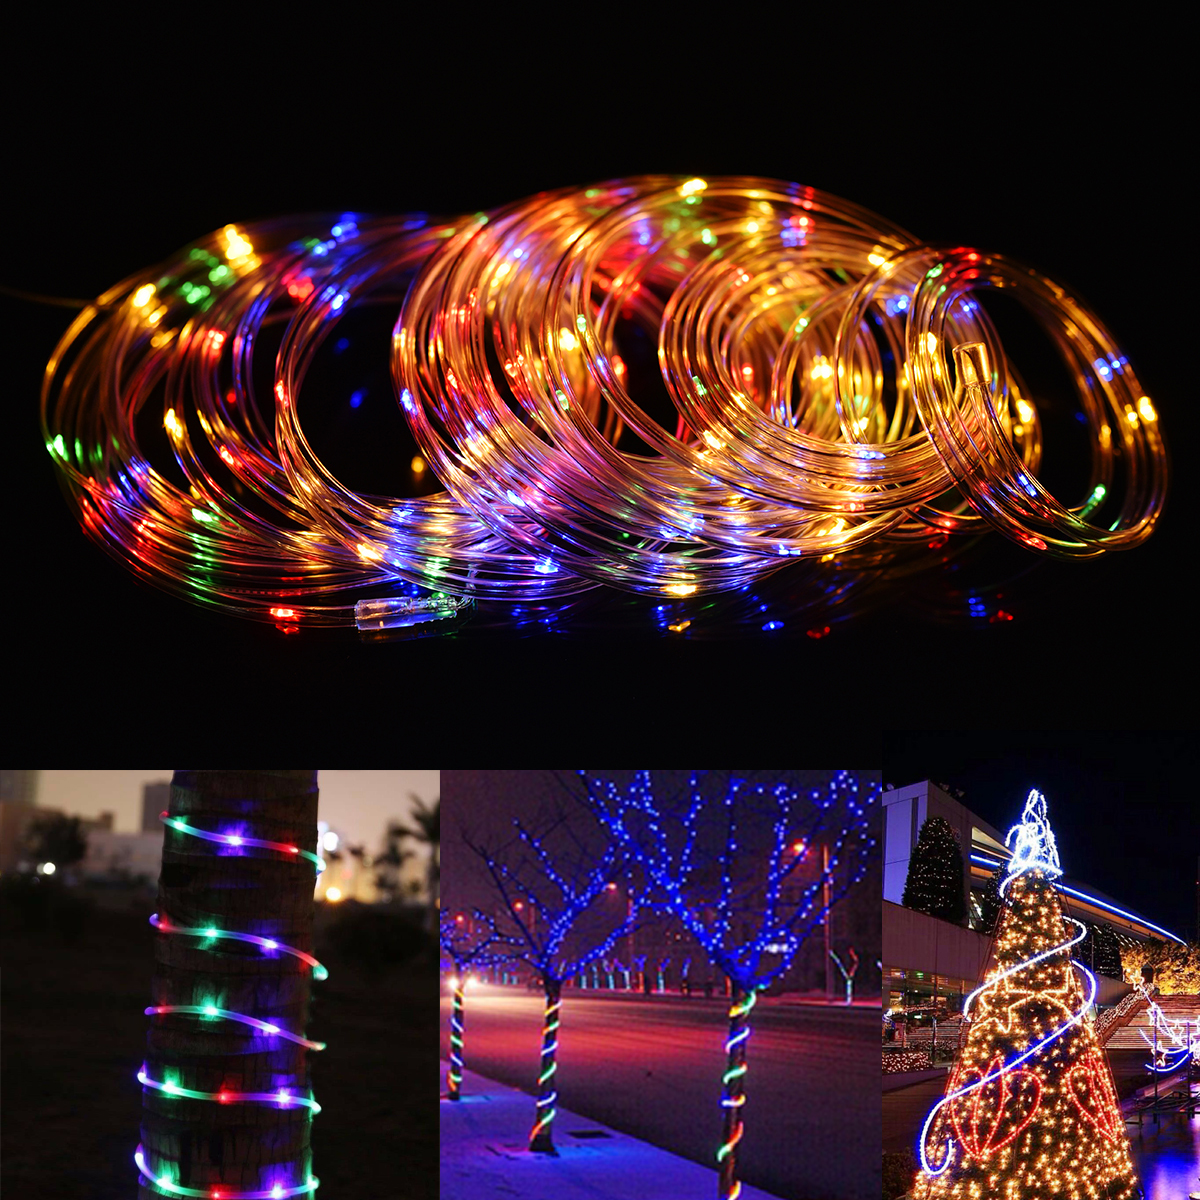 12M-Battery-Powered-120LED-String-Light-8-Modes-Remote-Control-Fairy-Lamp-Party-Christmas-Home-Decor-1351130-4